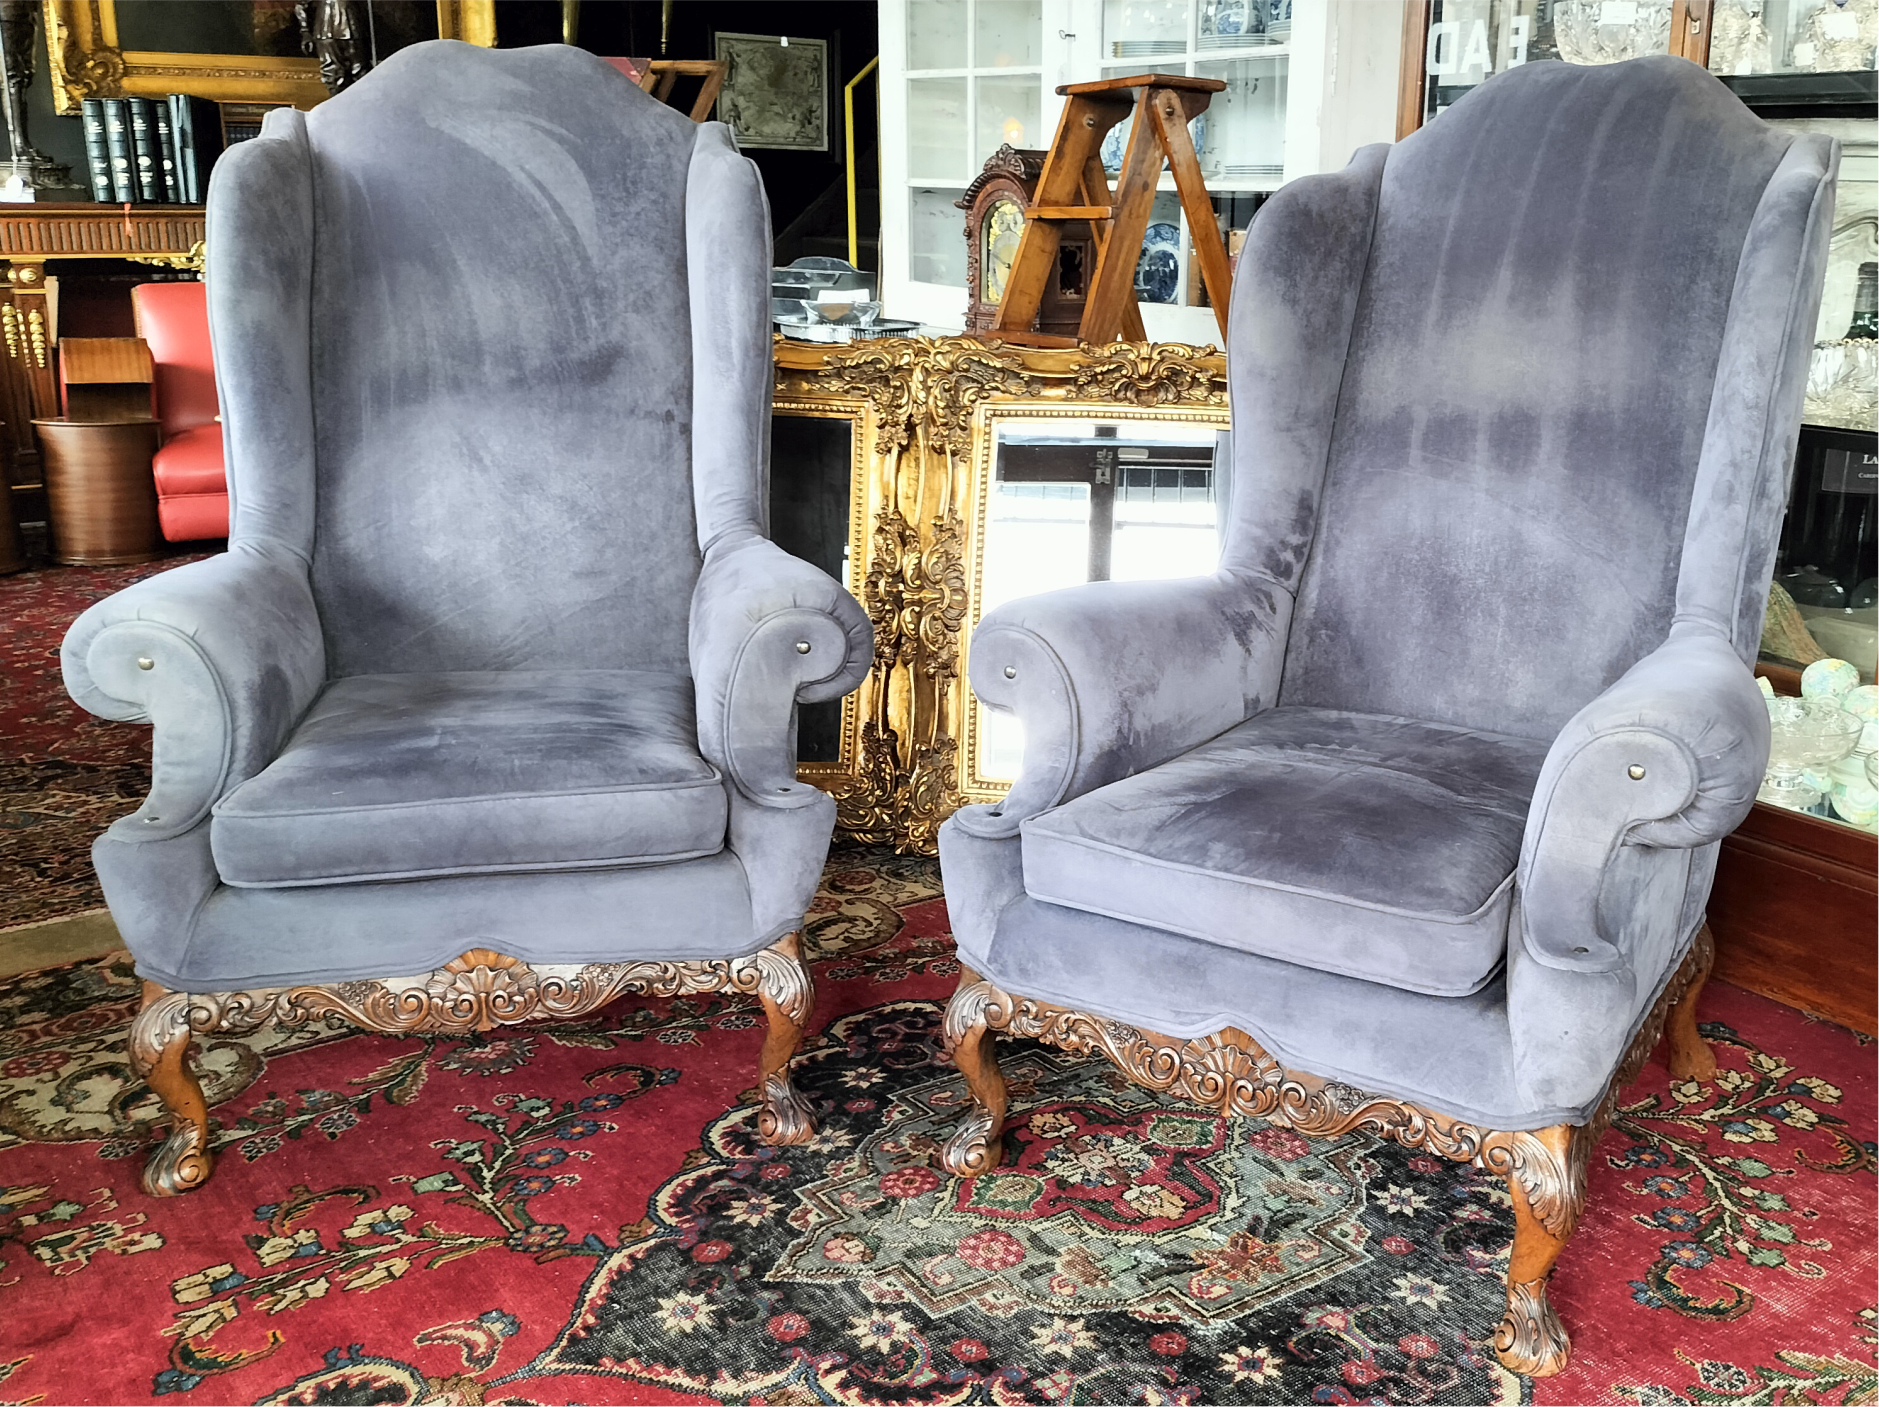 Objects - Antiques - Parkhurst - Johannesburg -Landing Page - South Africa - Fine Antiques - Decor Accents - Contact us - AntiquesandObjects.com - Antique Wooden Chair - Victorian - Velvet - Wood - Stunning - European High Back Wing Chairs Circa 1920